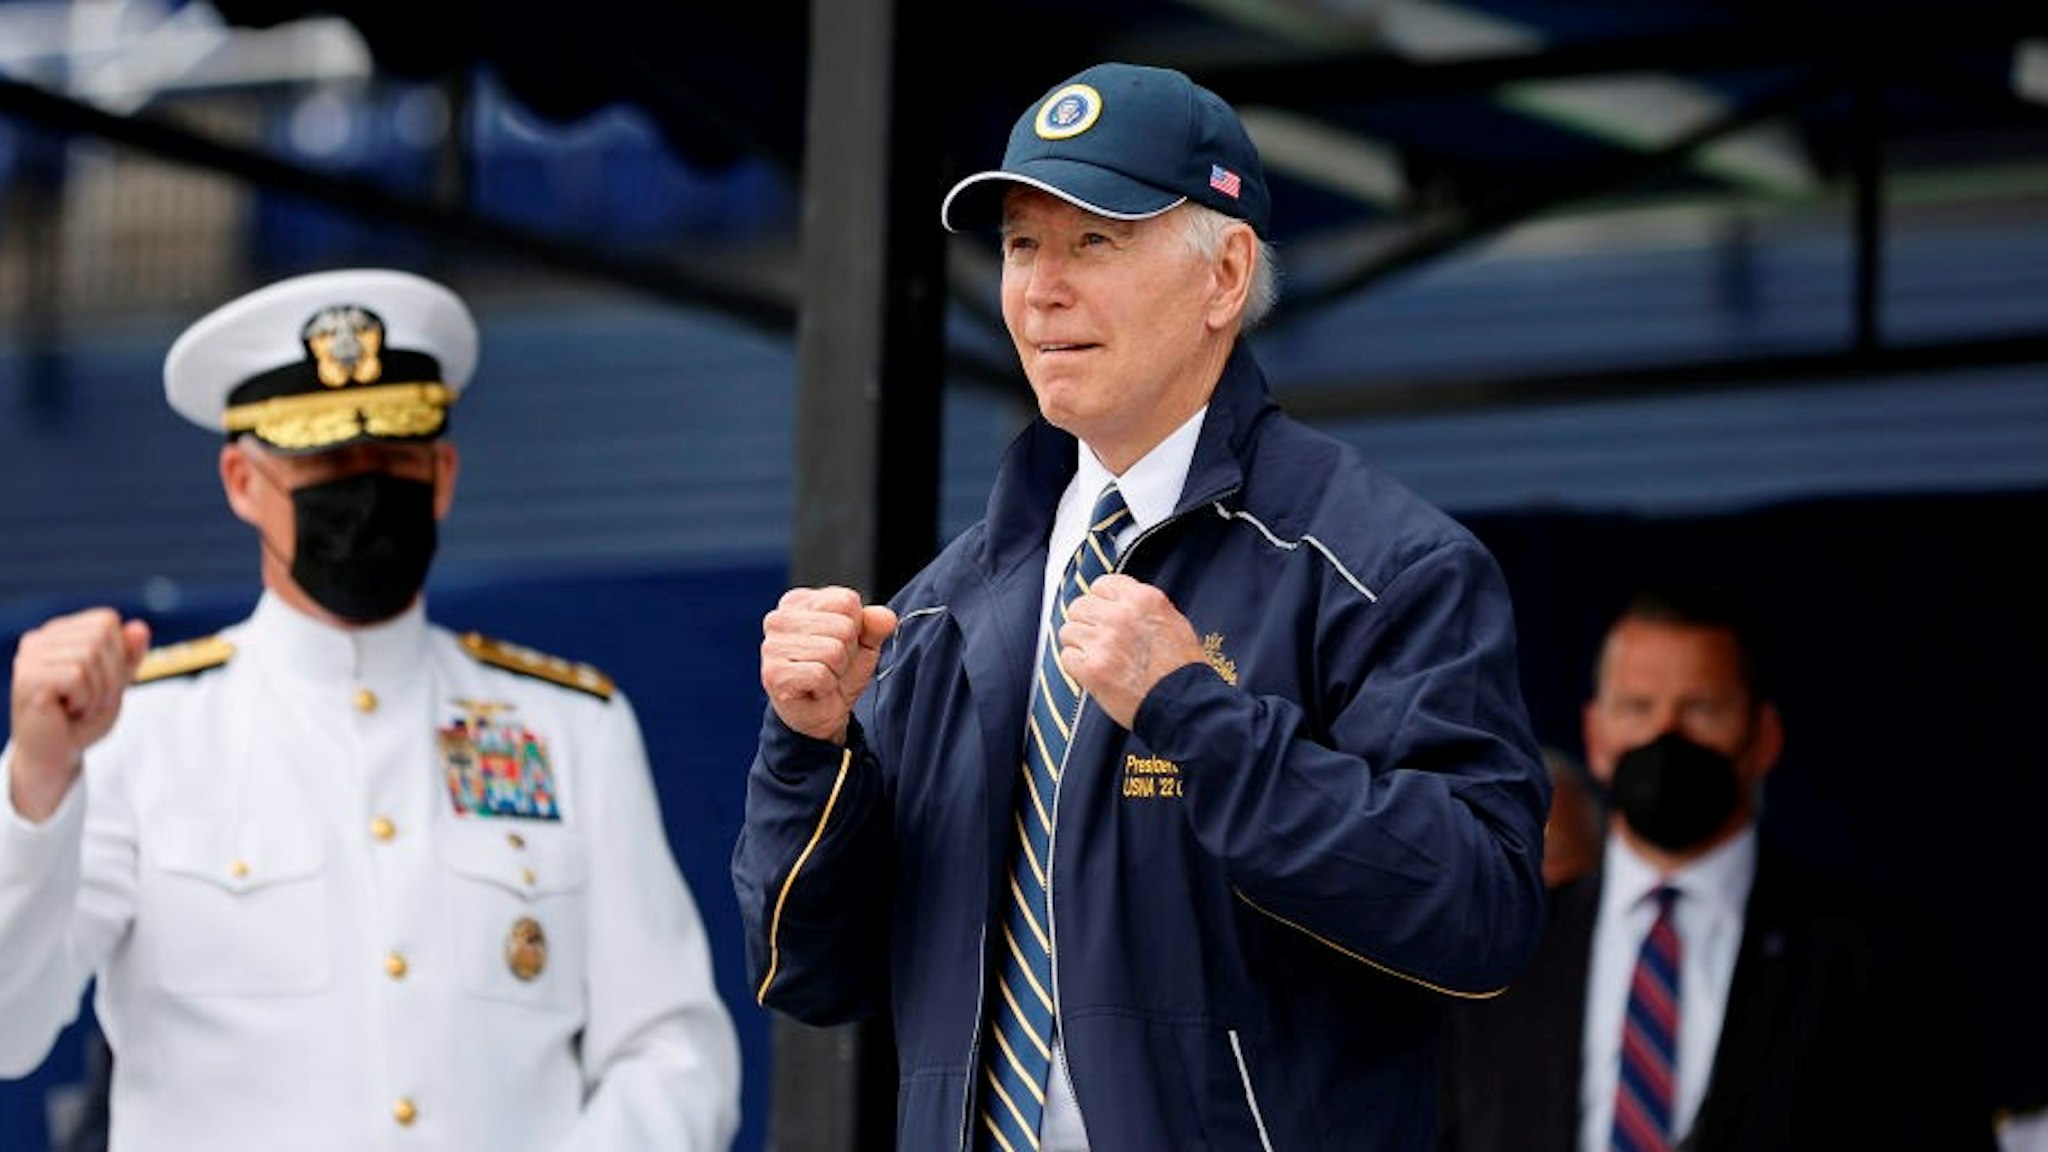 ANNAPOLIS, MARYLAND - MAY 27: U.S. President Joe Biden shows off the jacket and hat he received as a gift from the graduating class of the U.S. Naval Academy at the conclusion of the graduation and commissioning ceremony in Memorial Stadium on May 27, 2022 in Annapolis, Maryland. a total of 1,100 sailors and Marines graduated from the service academy. (Photo by